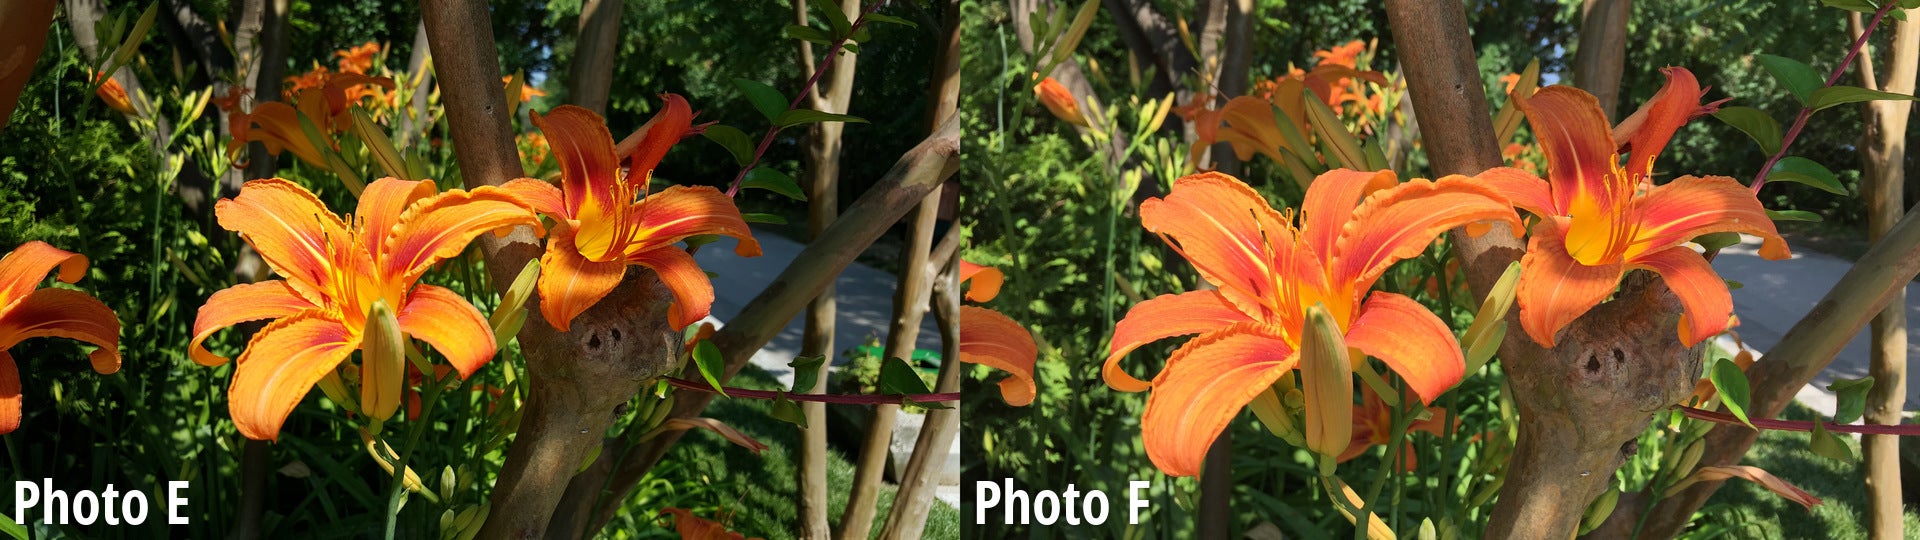 Side-by-side comparison - Samsung Galaxy S6 vs iPhone 6 blind camera comparison: vote for the better phone